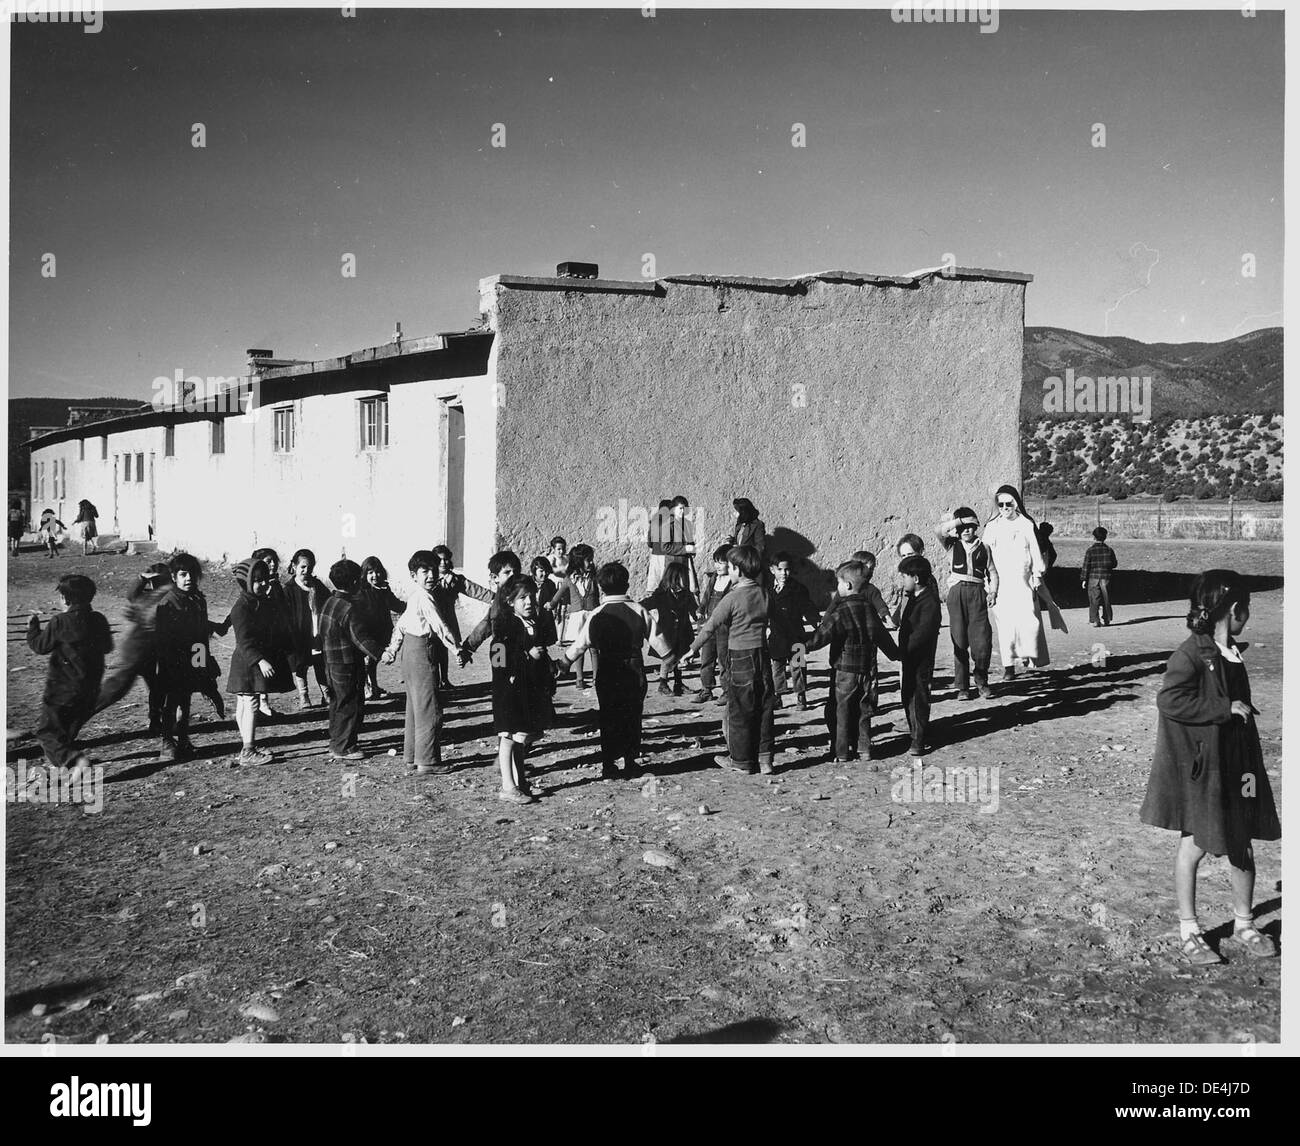 Taos County, New Mexico. Children play in the Penasco schoolyard. School was built by the Catholic . . . 521831 Stock Photo